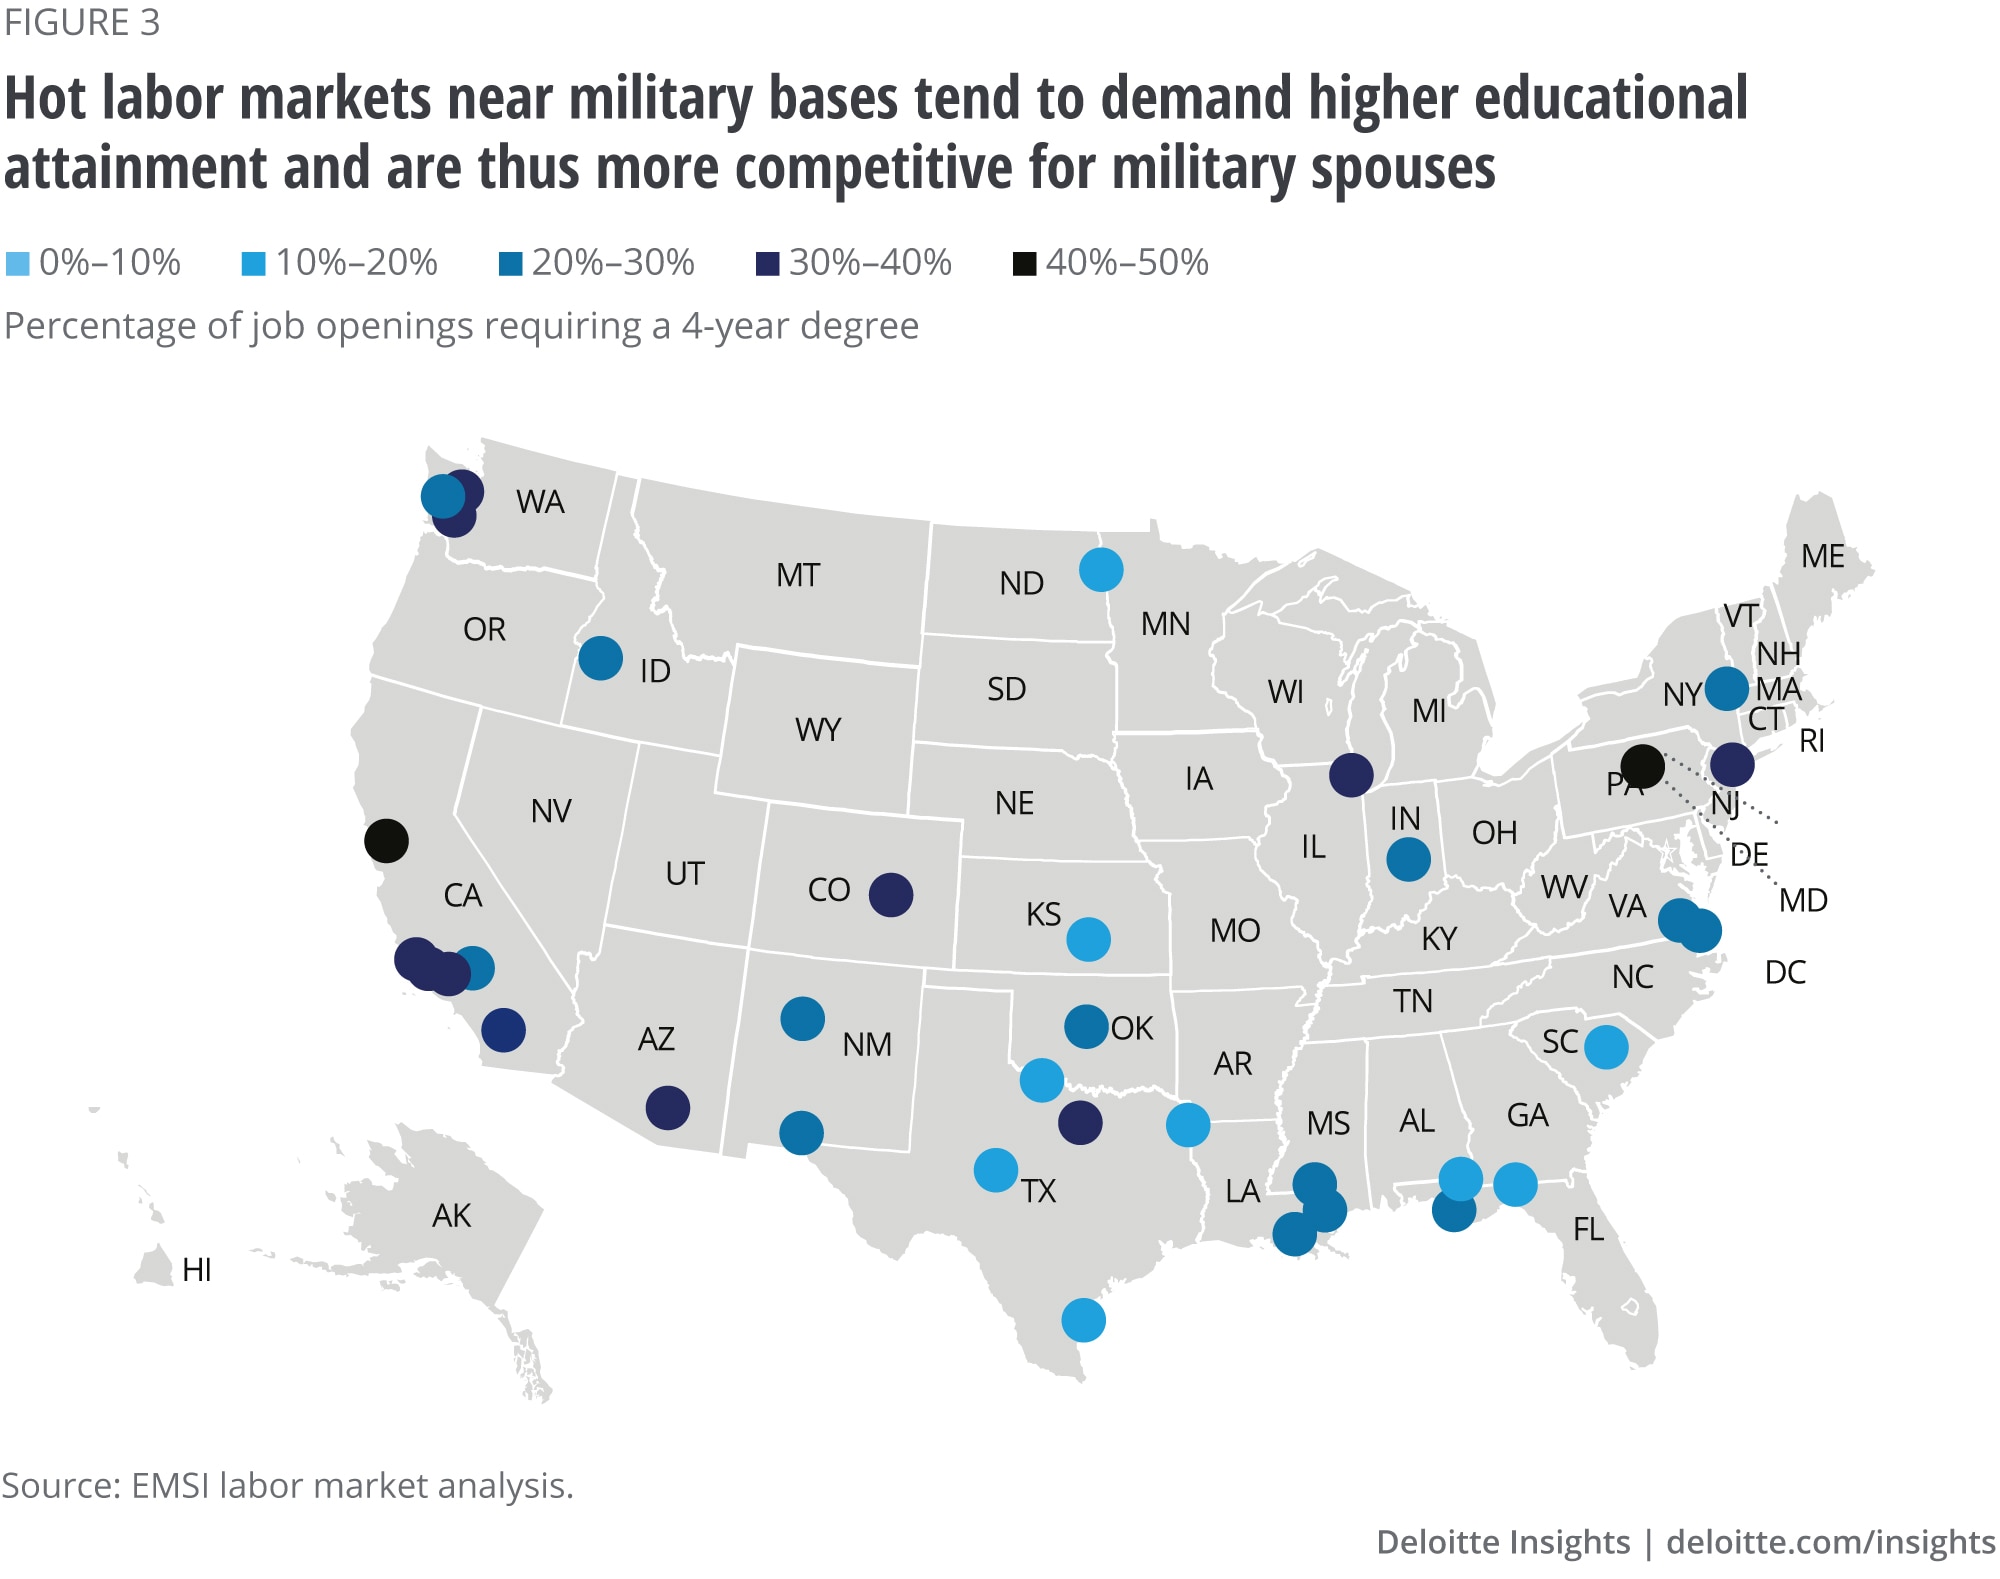 Hot labor markets near military bases tend to demand higher educational attainment and are thus more competitive for military spouses